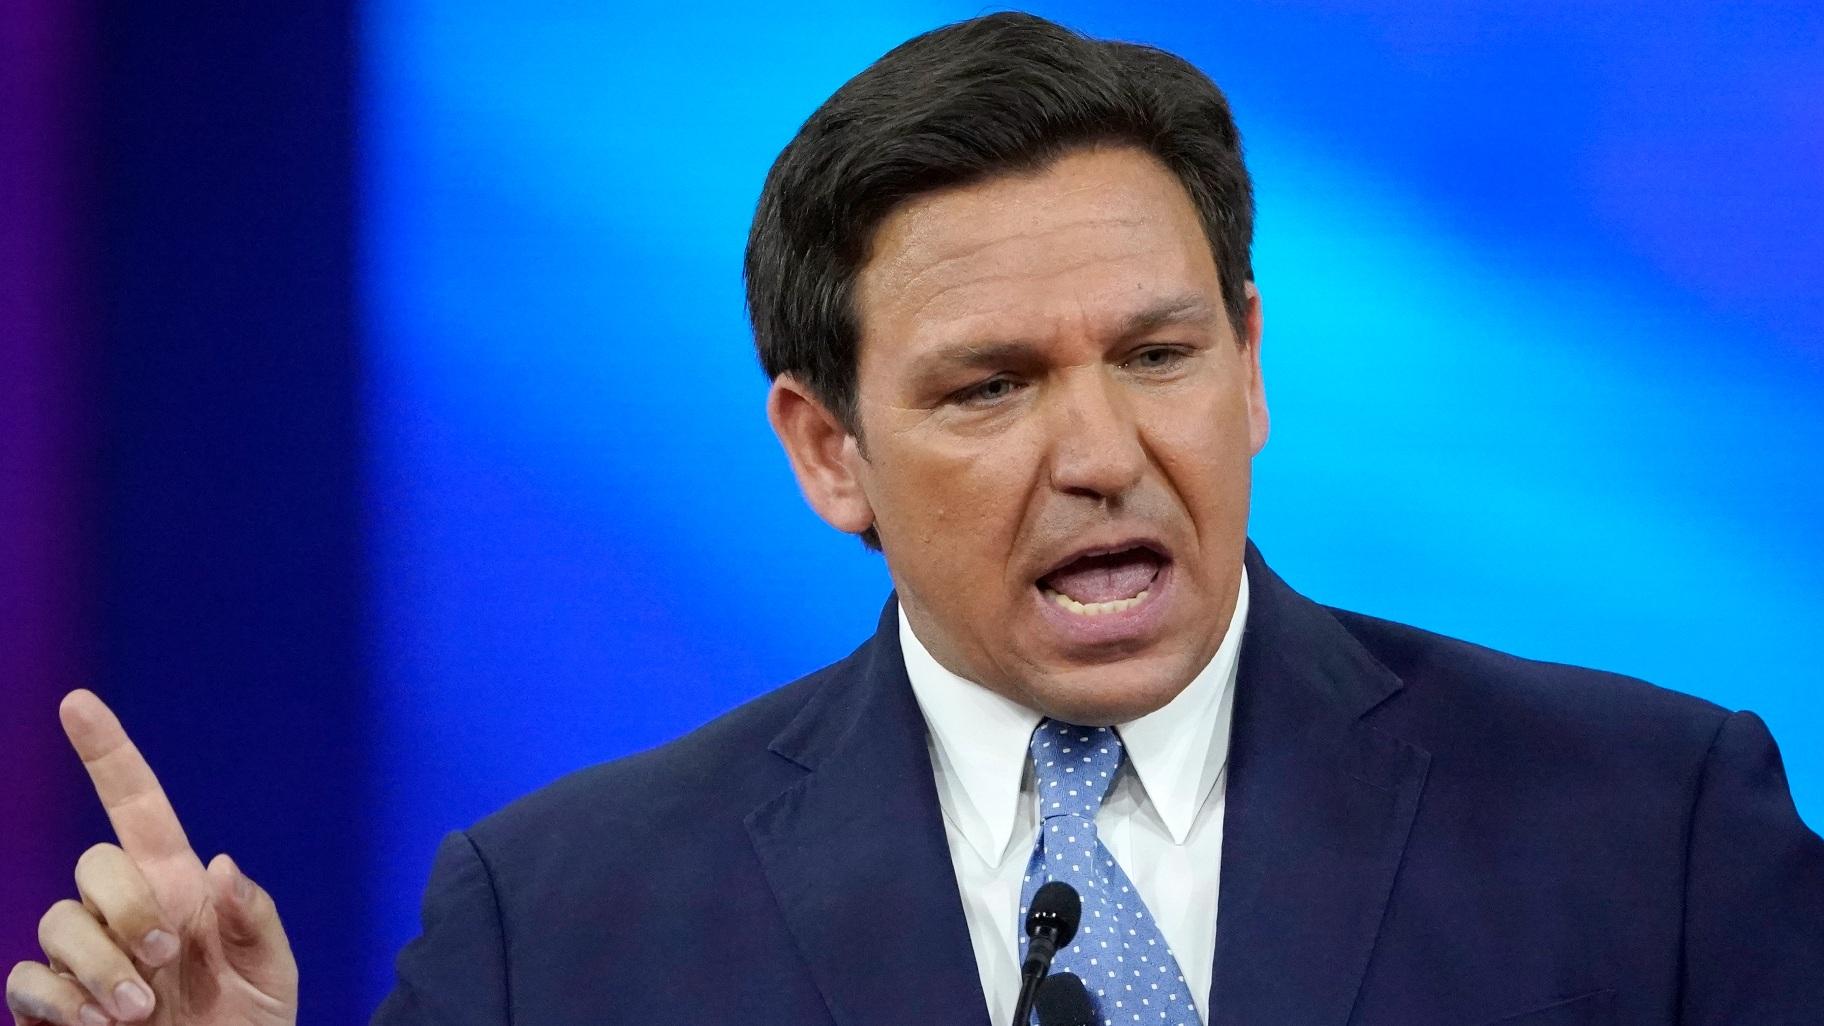 Florida Gov. Ron DeSantis speaks at the Conservative Political Action Conference (CPAC), Feb. 24, 2022, in Orlando, Fla. DeSantis has filed a declaration of candidacy for president, entering the 2024 race as Donald Trump's top GOP rival (AP Photo / John Raoux, File)